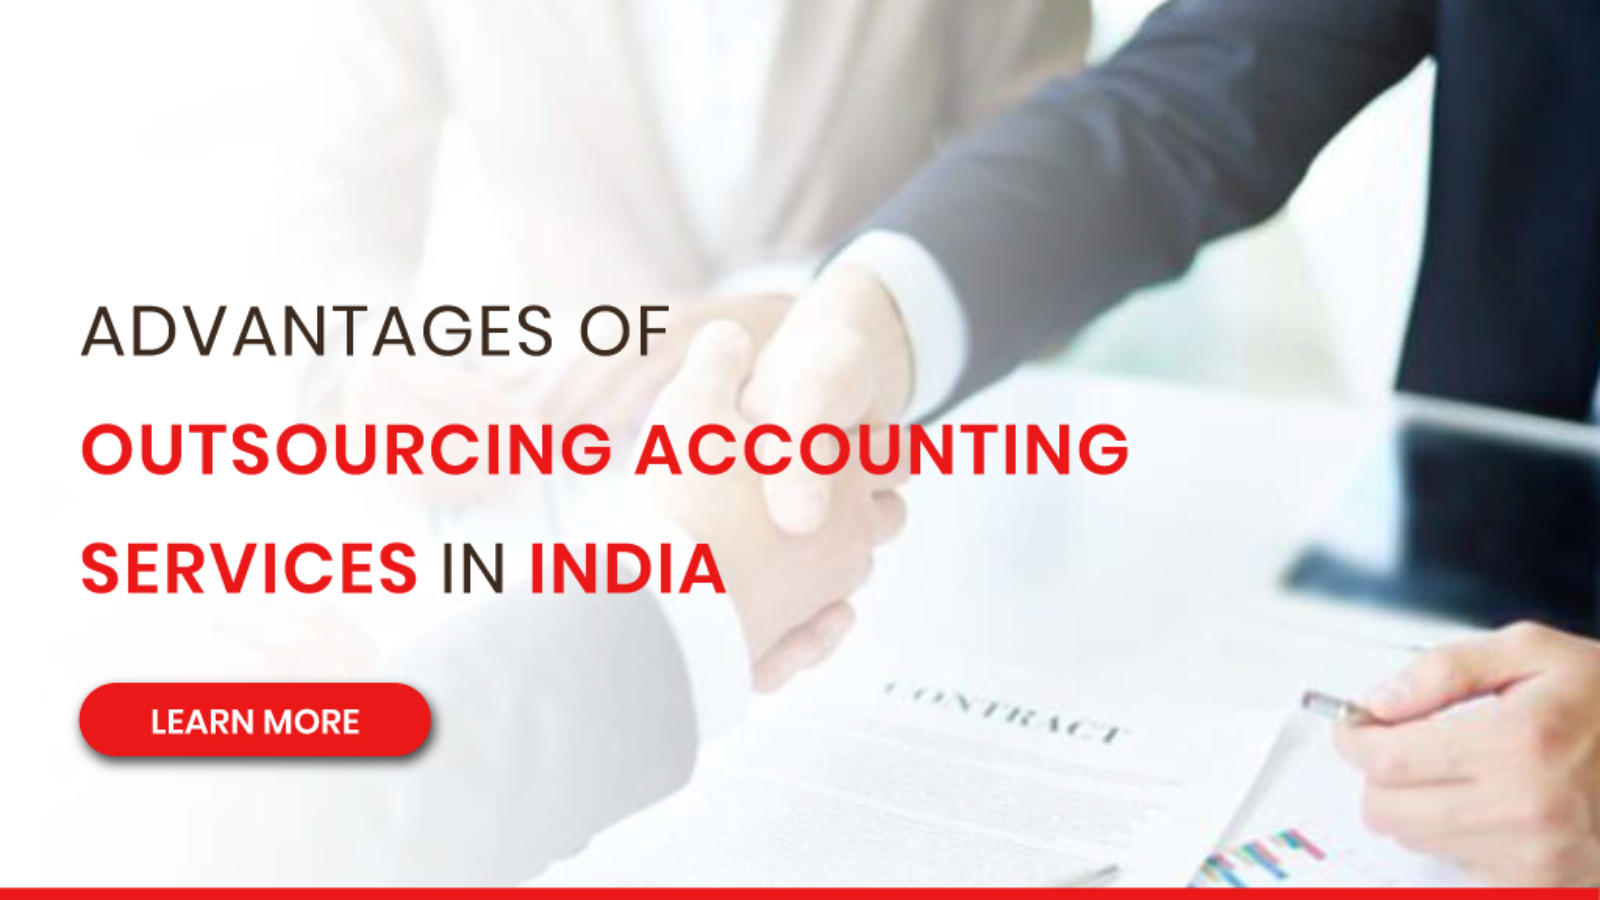 Advantages of Outsourcing Accounting Services in India